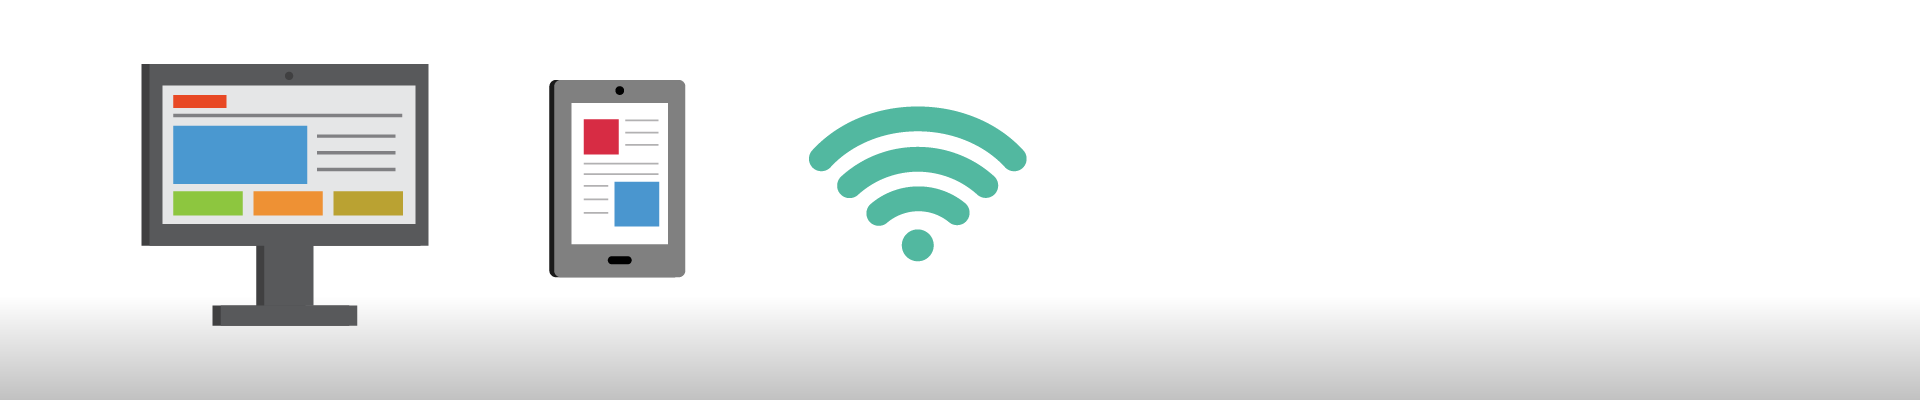 image of computer, tablet and wifi symbol